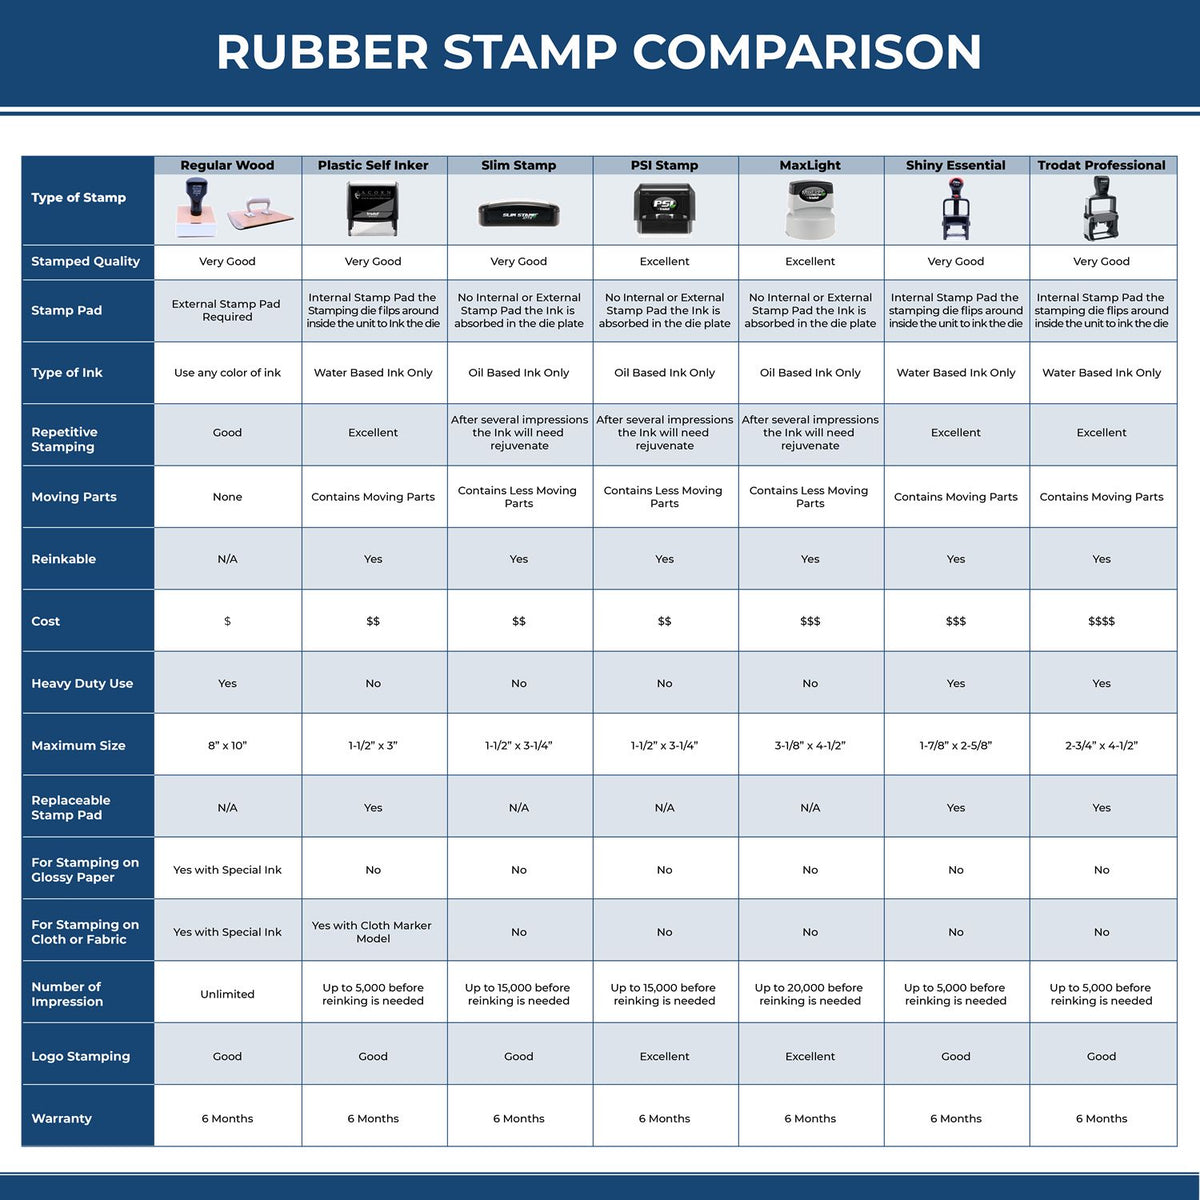 A comparison chart for the different types of mount models available for the Self-Inking Tennessee Landscape Architect Stamp.